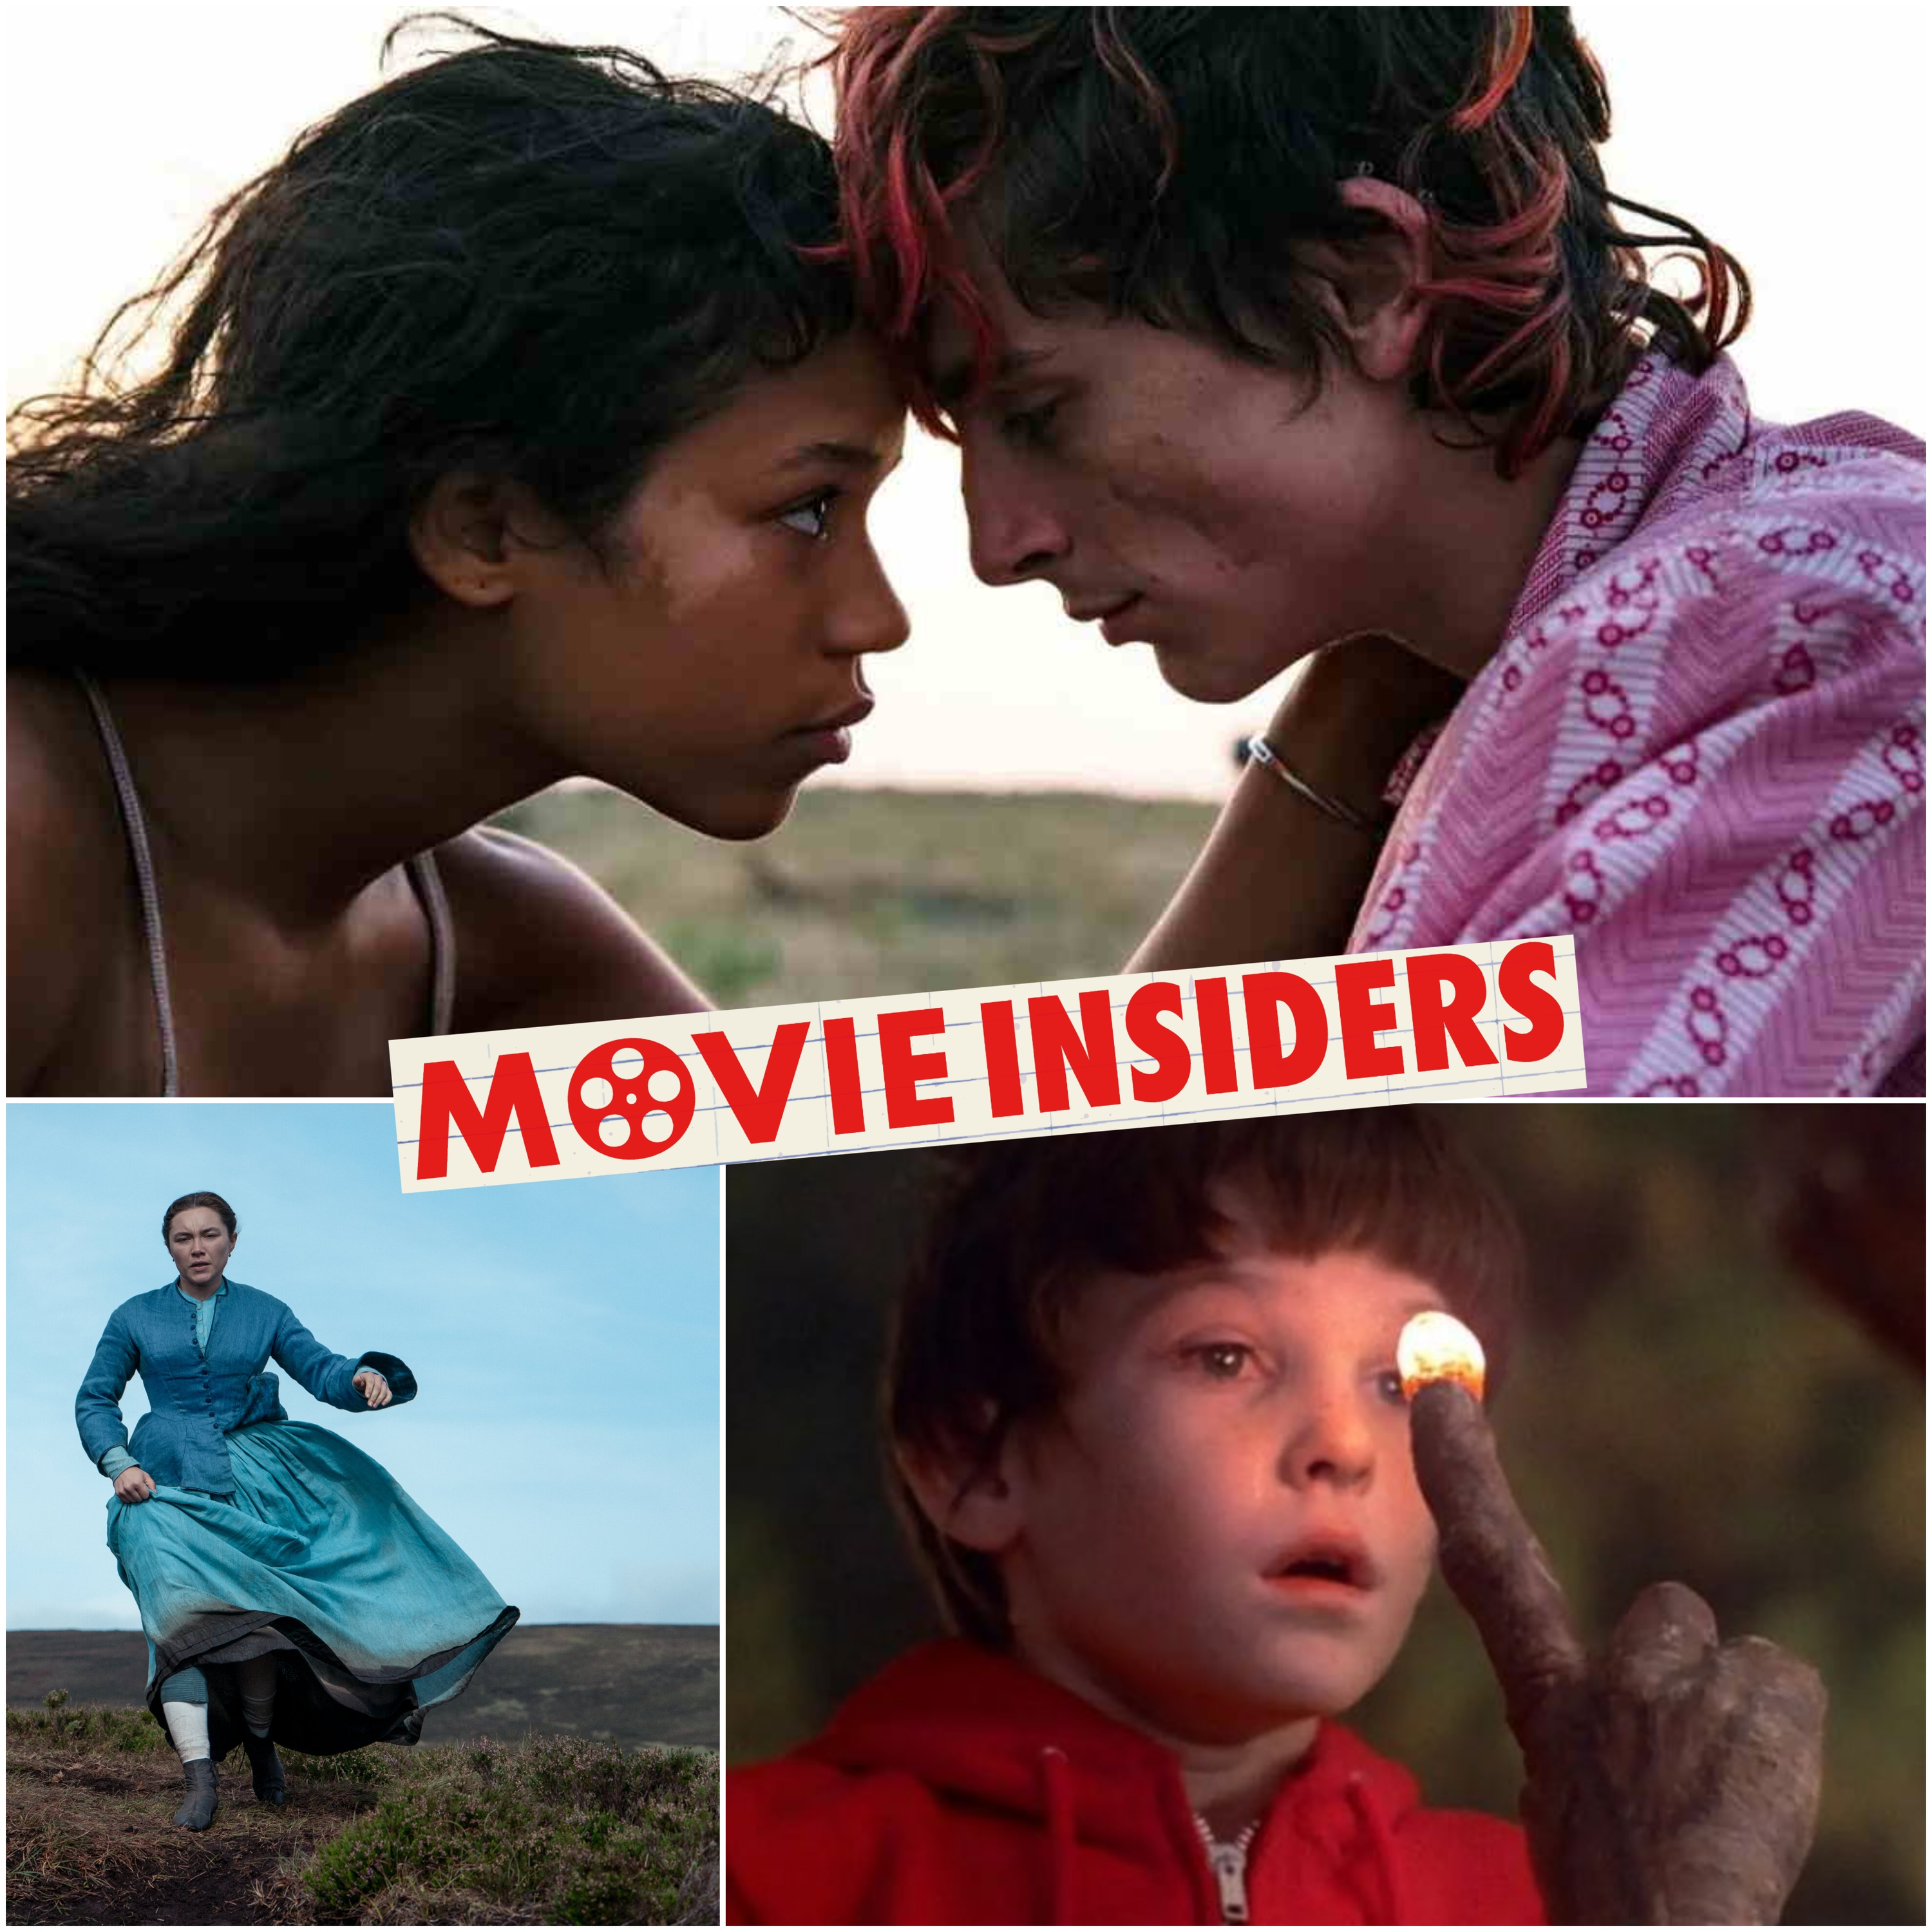 MovieInsiders 351: Bones and All, Rose, Piggy, Emily, The Wonder, Interview met Henry Thomas uit E.T.